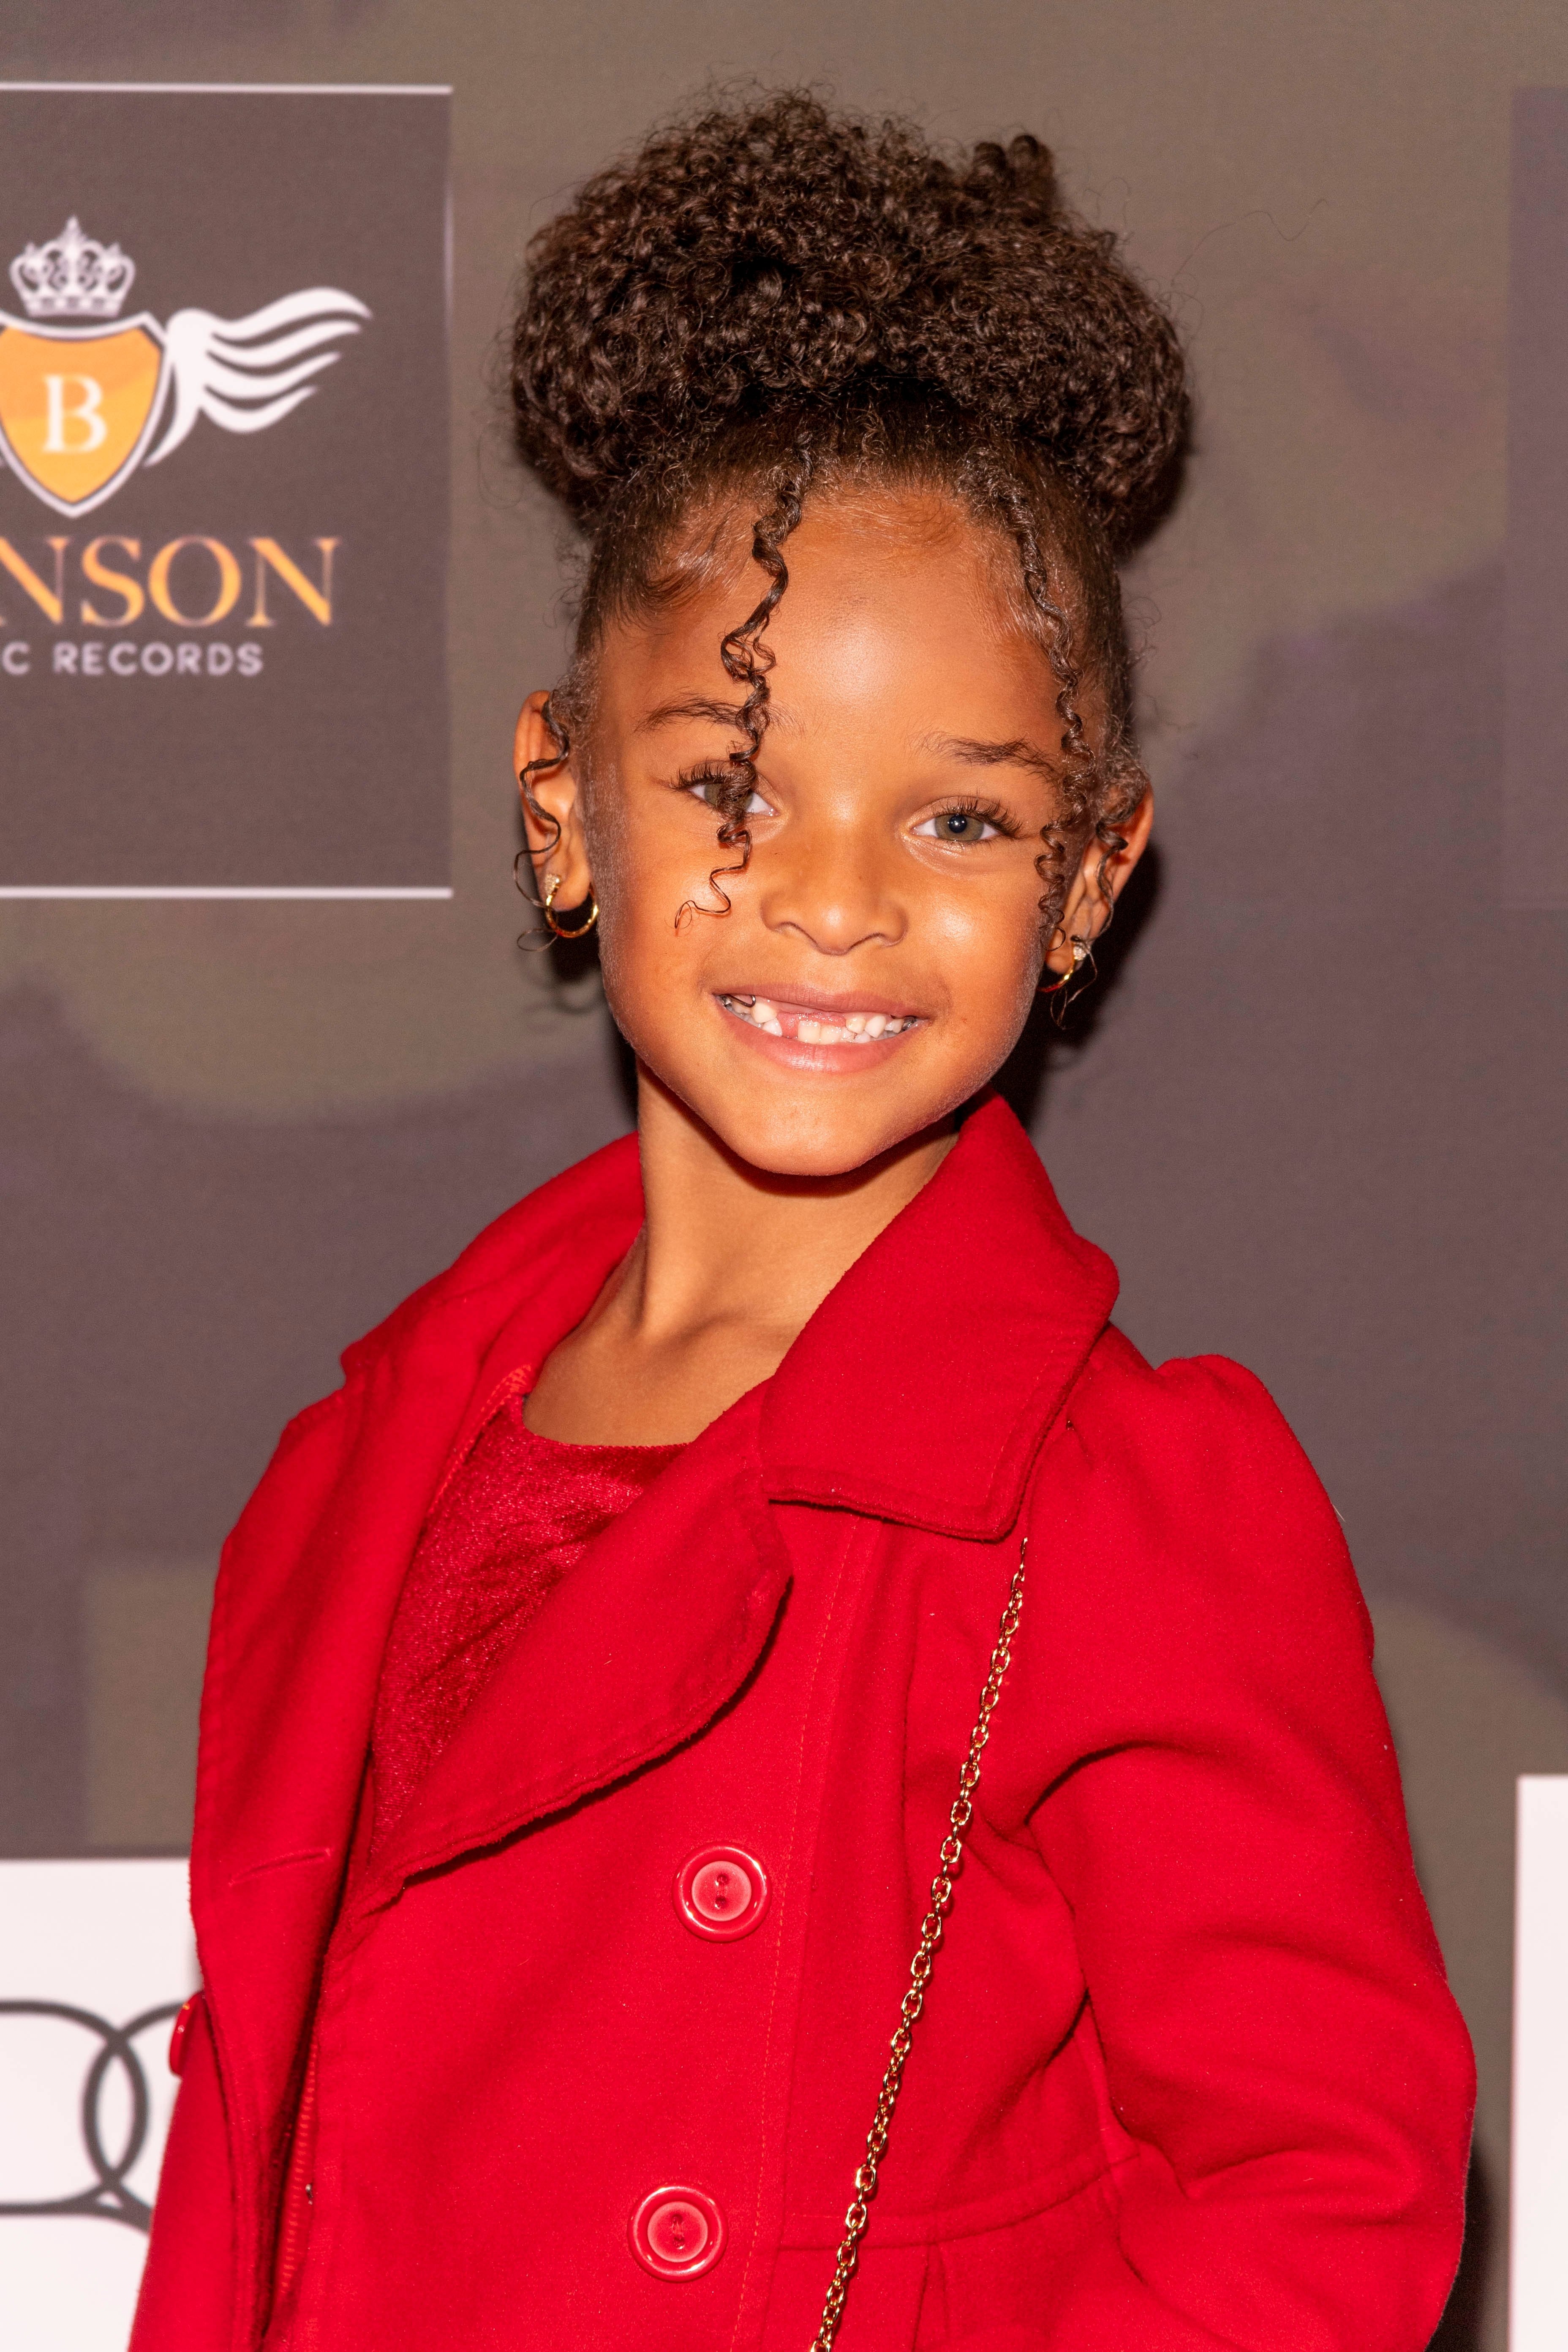 Khari Barbie Maxwell at the 2022 Afro Awards on November 6, 2022, in Los Angeles | Source: Shutterstock